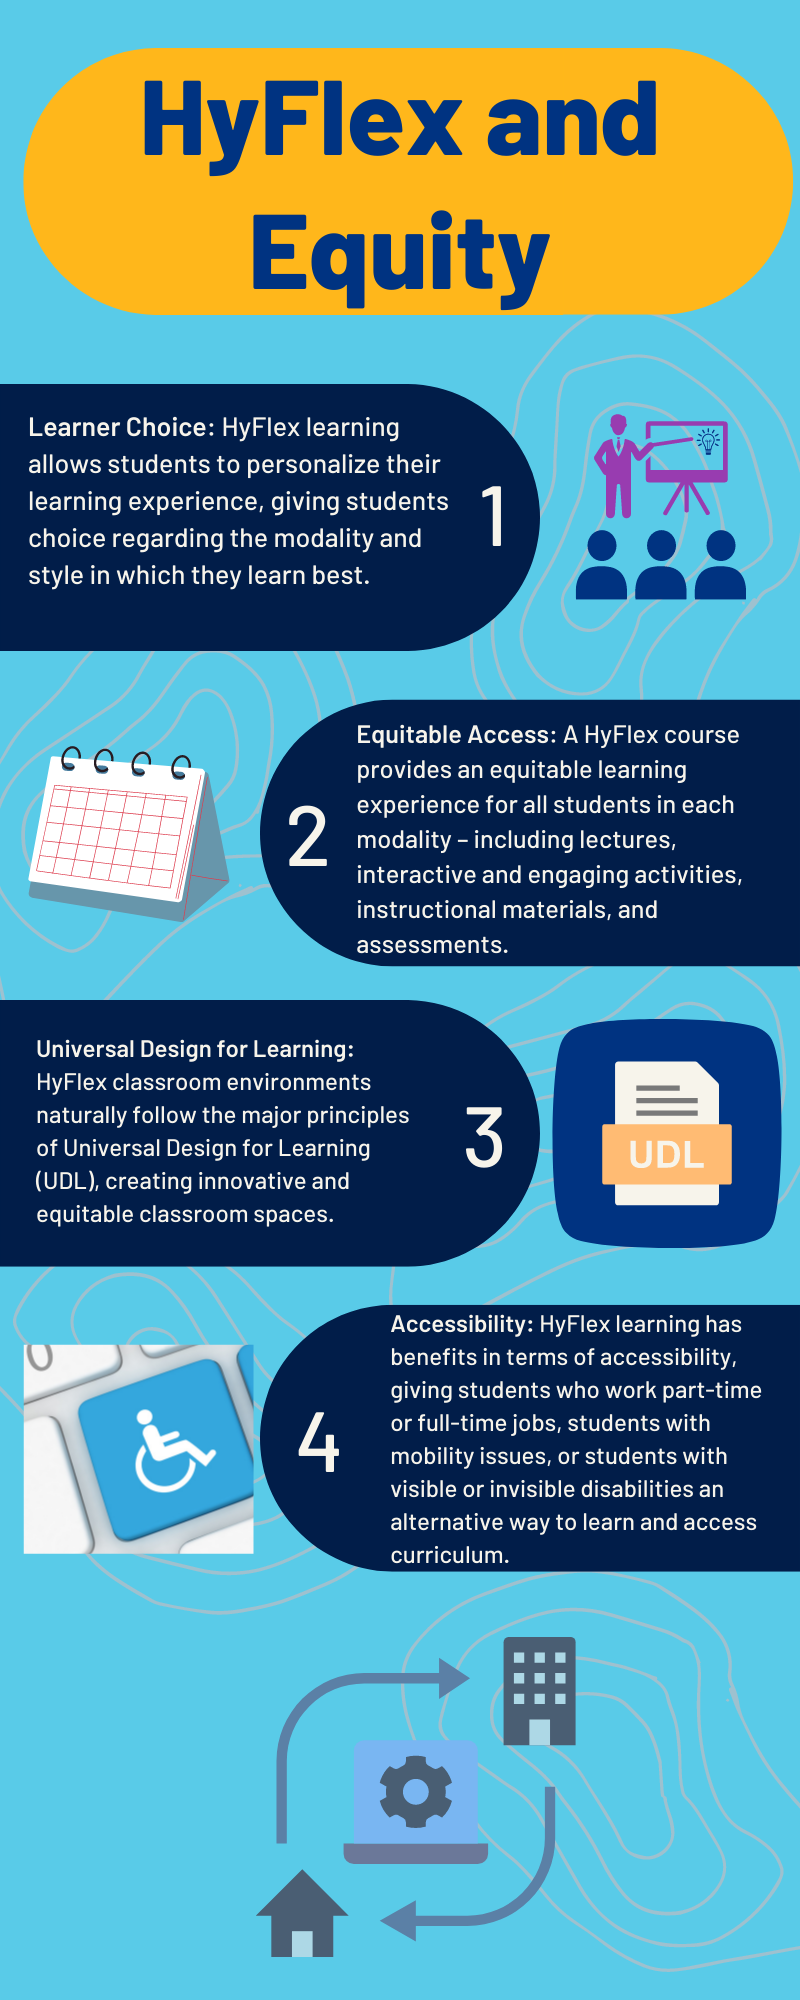 HyFlex and Equity Infographic
Dark blue call outs with white text on teal background

1. Learner Choice: Hyflex learning allows students to personalize their learning experience, giving students choice regarding the modality and style in which they learn best. 
2. Equitable Access: A HyFlex course provides and equitable learning experience for all students in each modality - including lectures, interactive and engaging activities, instructional materials, and assessments. 
3. Universal Design for Learning: HyFlex classroom environments naturally follow the major principles of Universal Design for Learning (UDL), creating innovative and equitable classroom spaces. 
4. Accessibility: HyFlex learning has benefits in terms of accessibility, giving students who work part-time or full-time jobs, students with mobility issues, or students with visible or invisible disabilities an alternative way to learn and access curriculum.